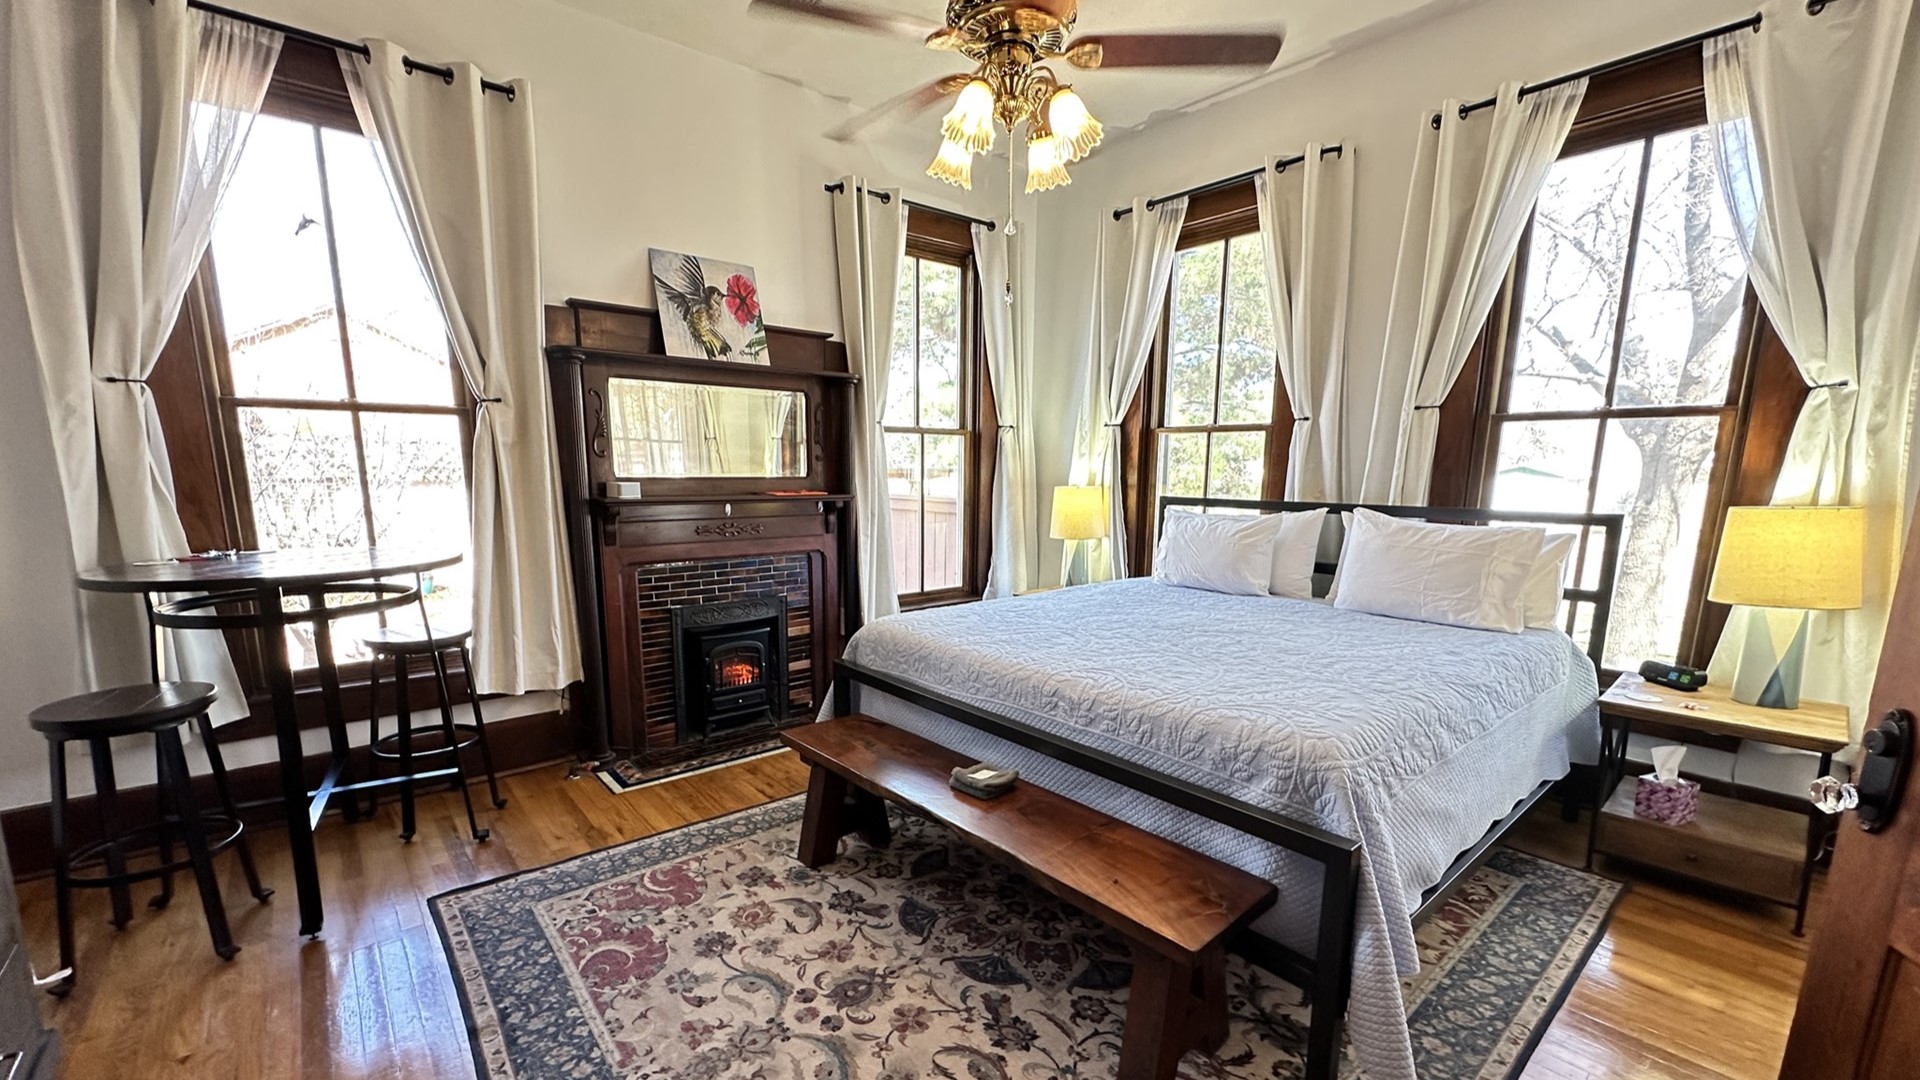 Sunlit room with king bed, 4 windows, large fireplace and mantle, bend, ceiling fan and light, nightstands, cafe table and stools